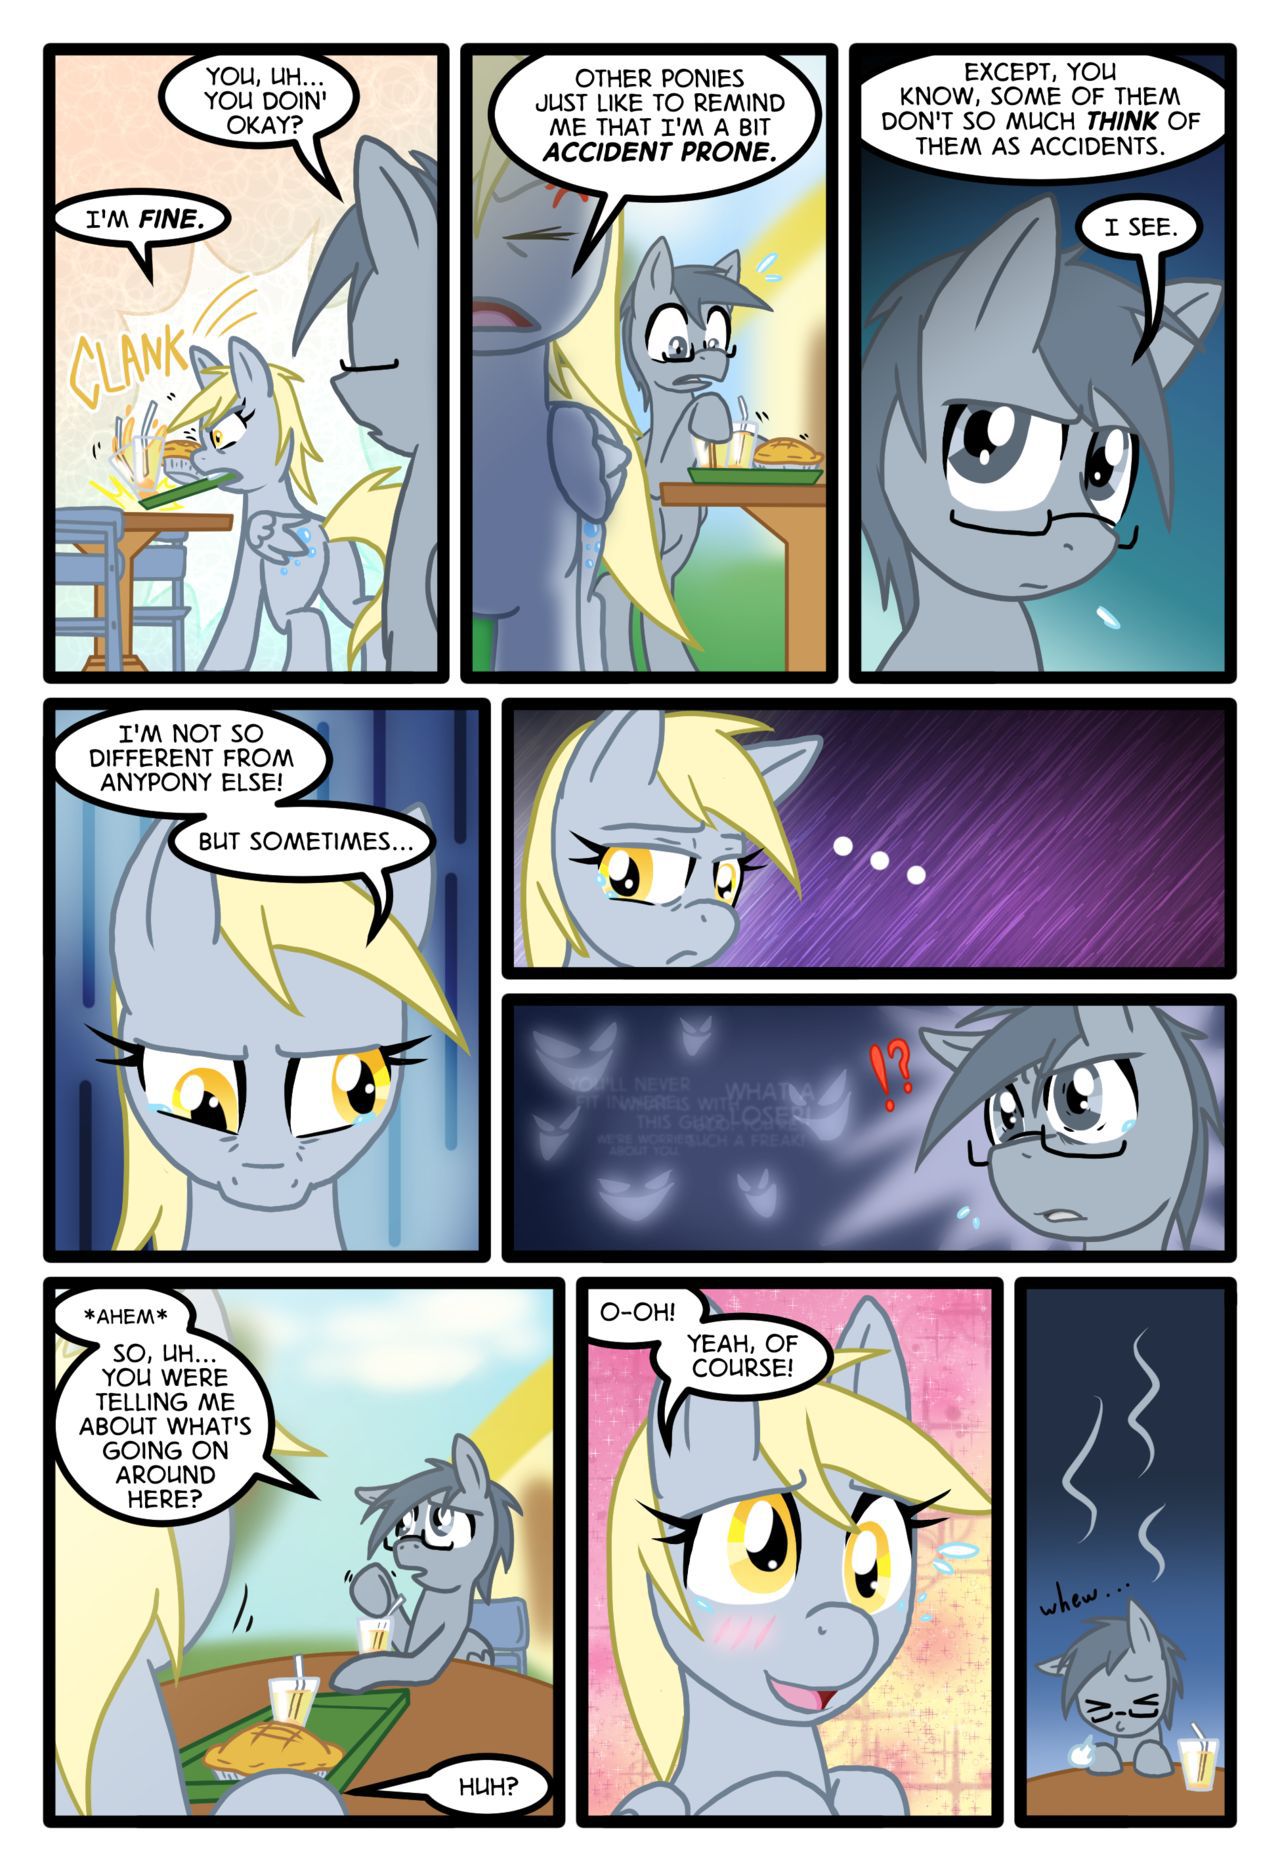 [Zaron] Lonely Hooves (My Little Pony Friendship Is Magic) [Ongoing] 16